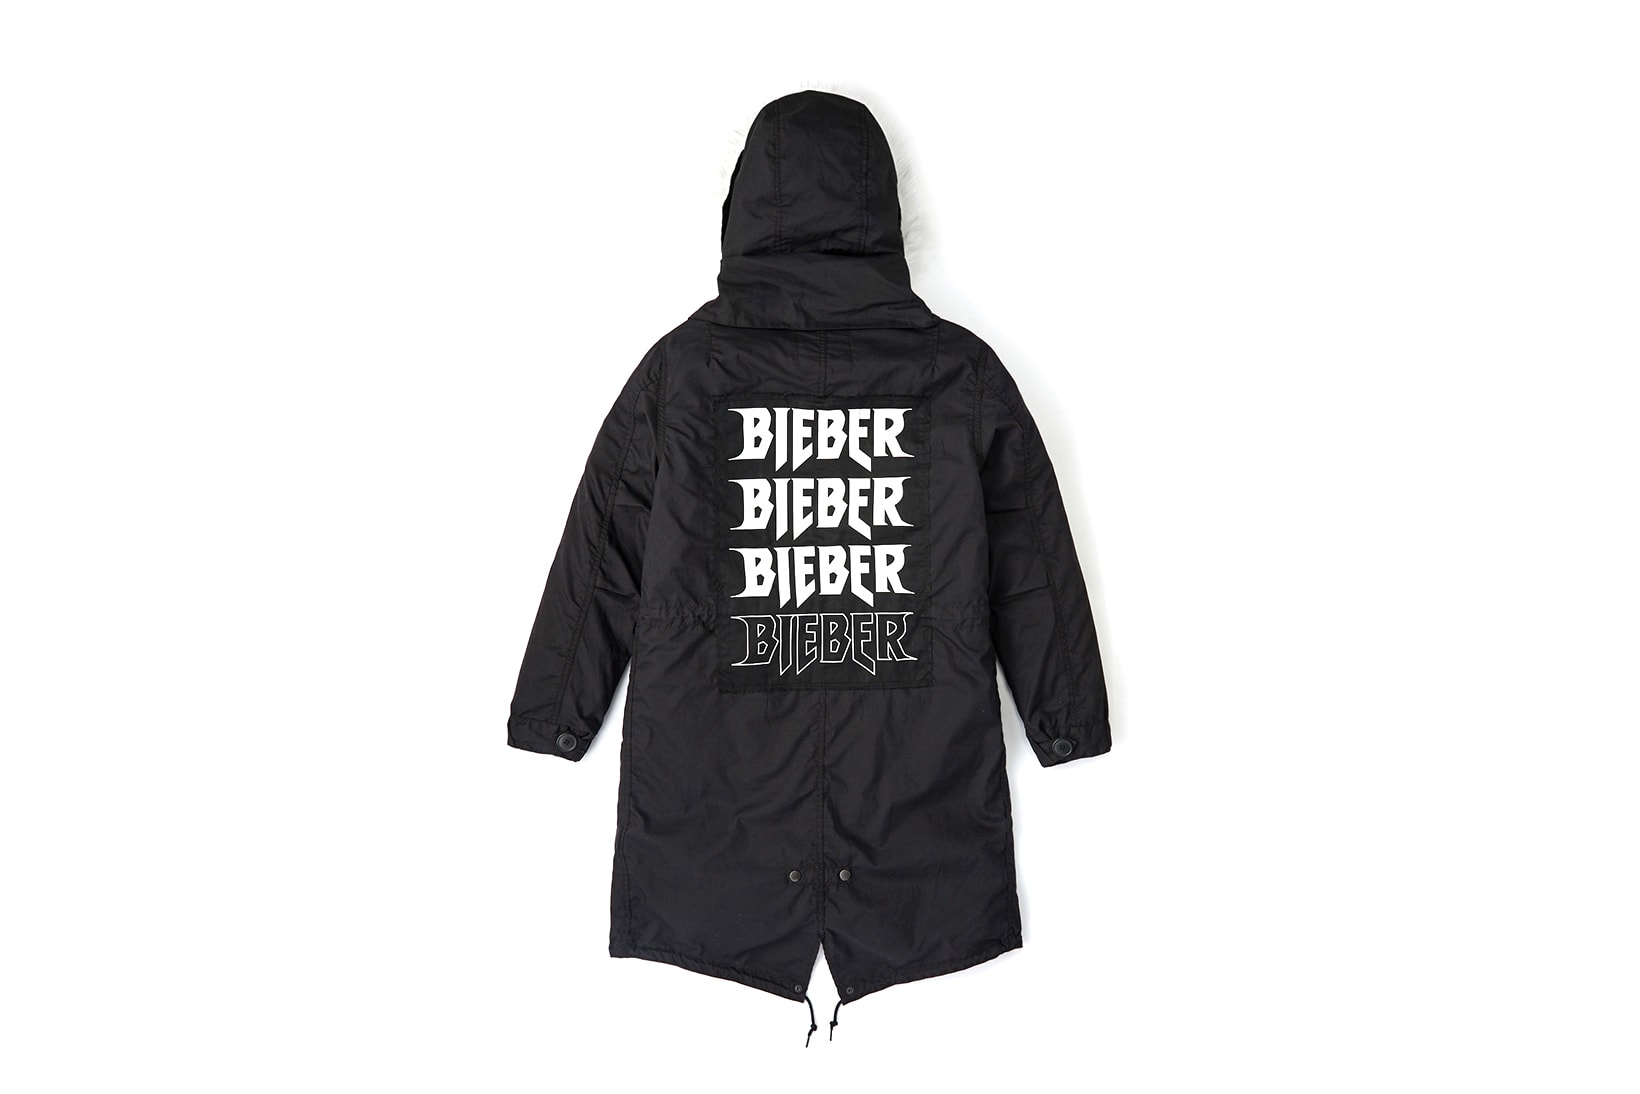 When Justin Bieber Inspired The Streetwear Style In Us With This